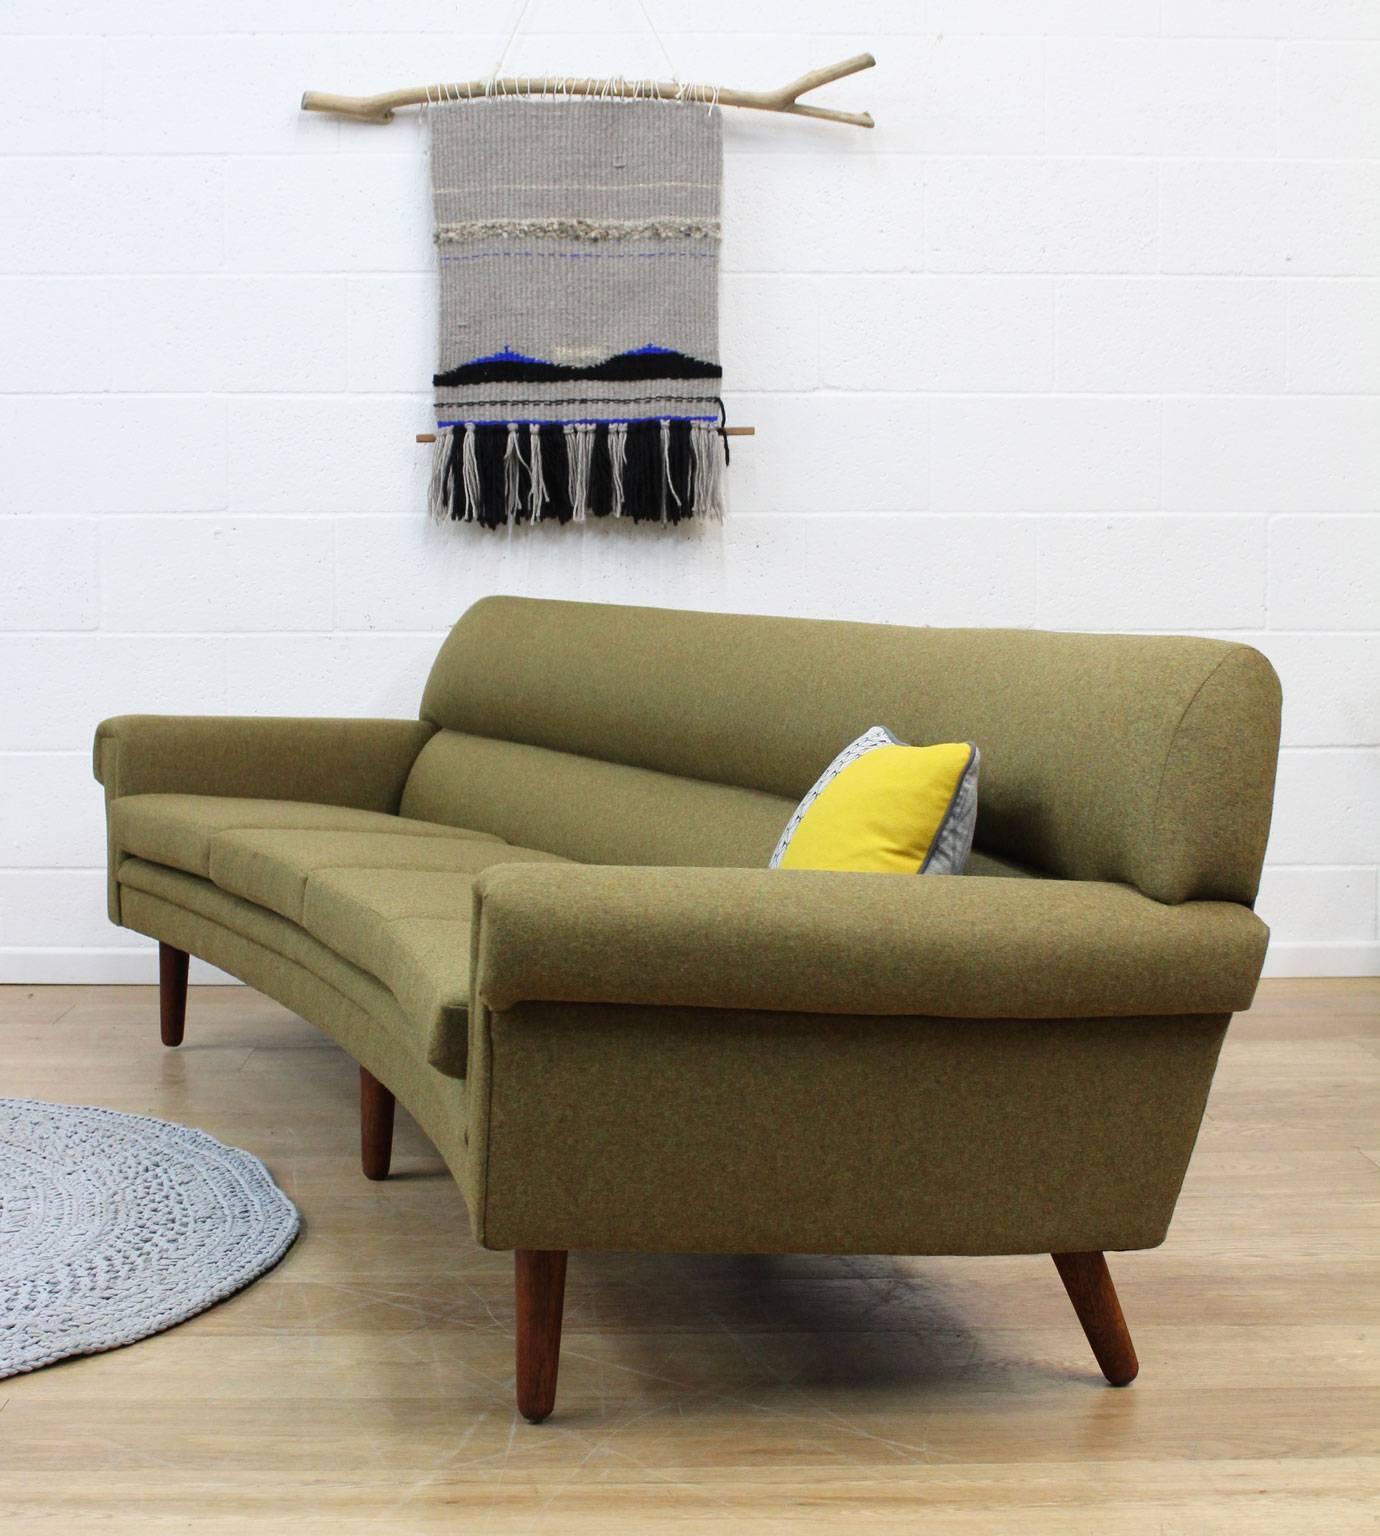 Danish Mid-Century Curved Four-Seat Sofa, Fully Restored in Wool In Excellent Condition In Haverhill, Suffolk